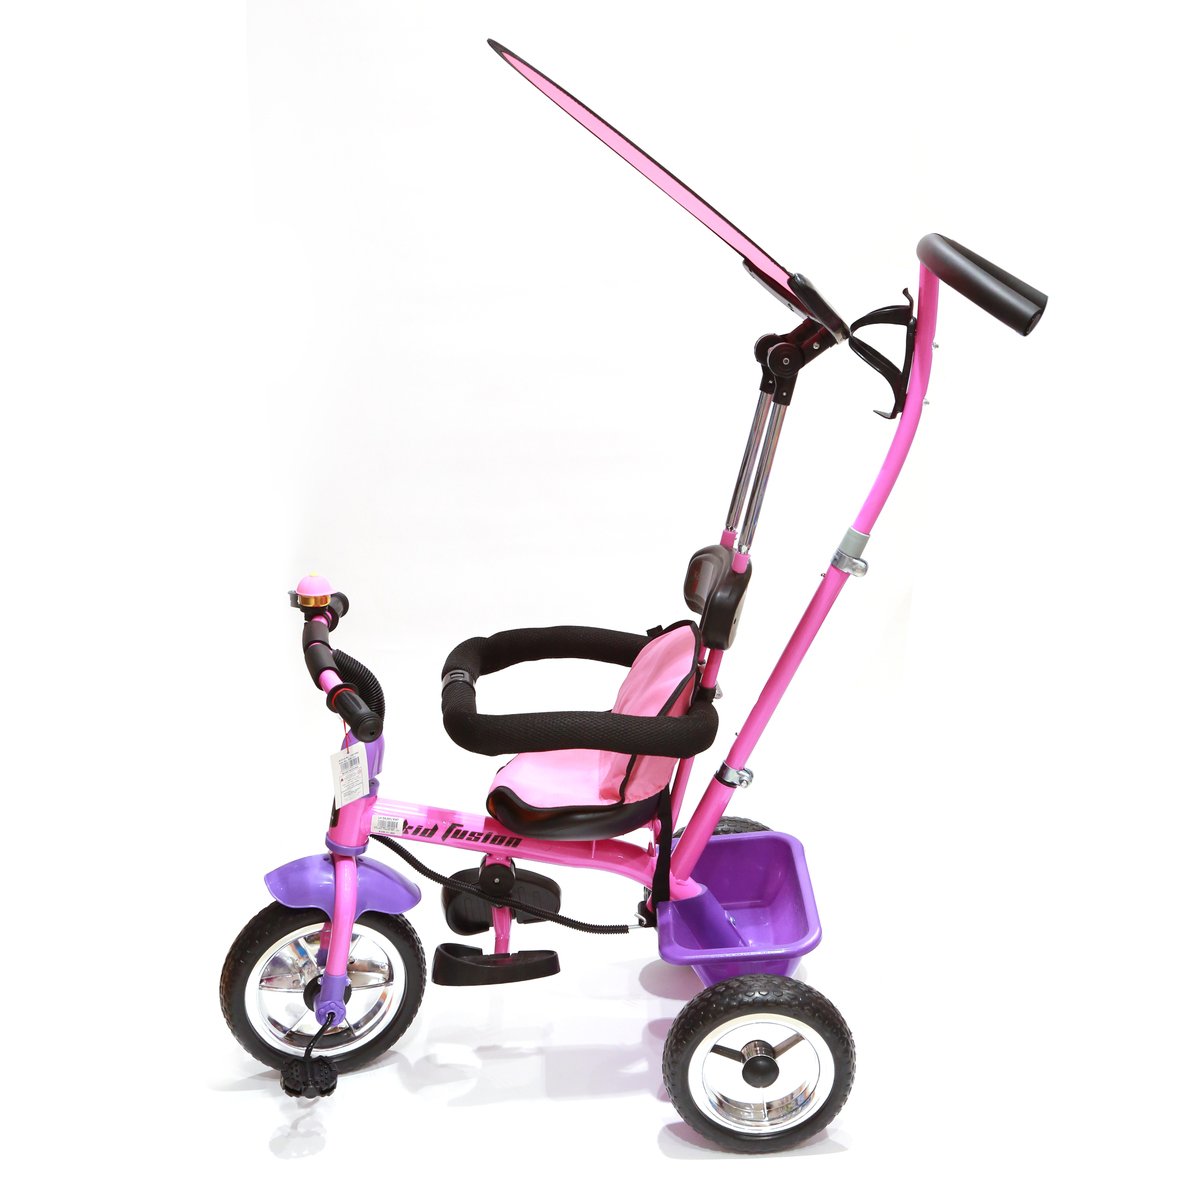 Skid Fusion Tricycle BW-101 Assorted Colors